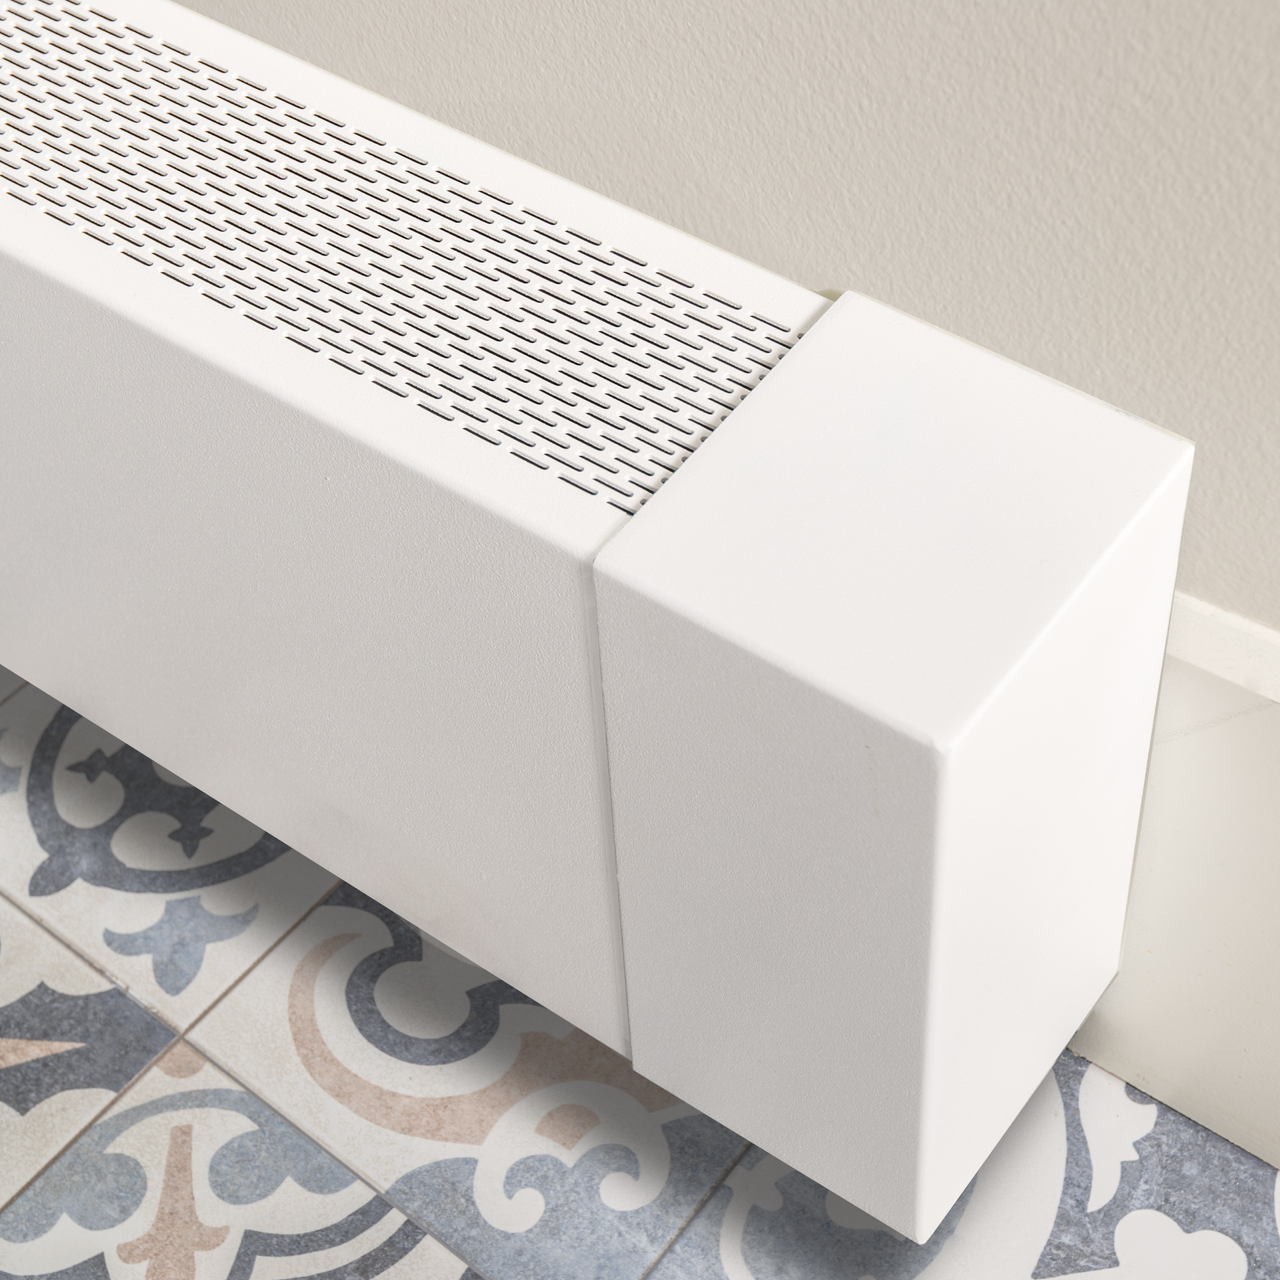 Baseboarders Review: Easy-to-Install Replacement Baseboard Heater Covers